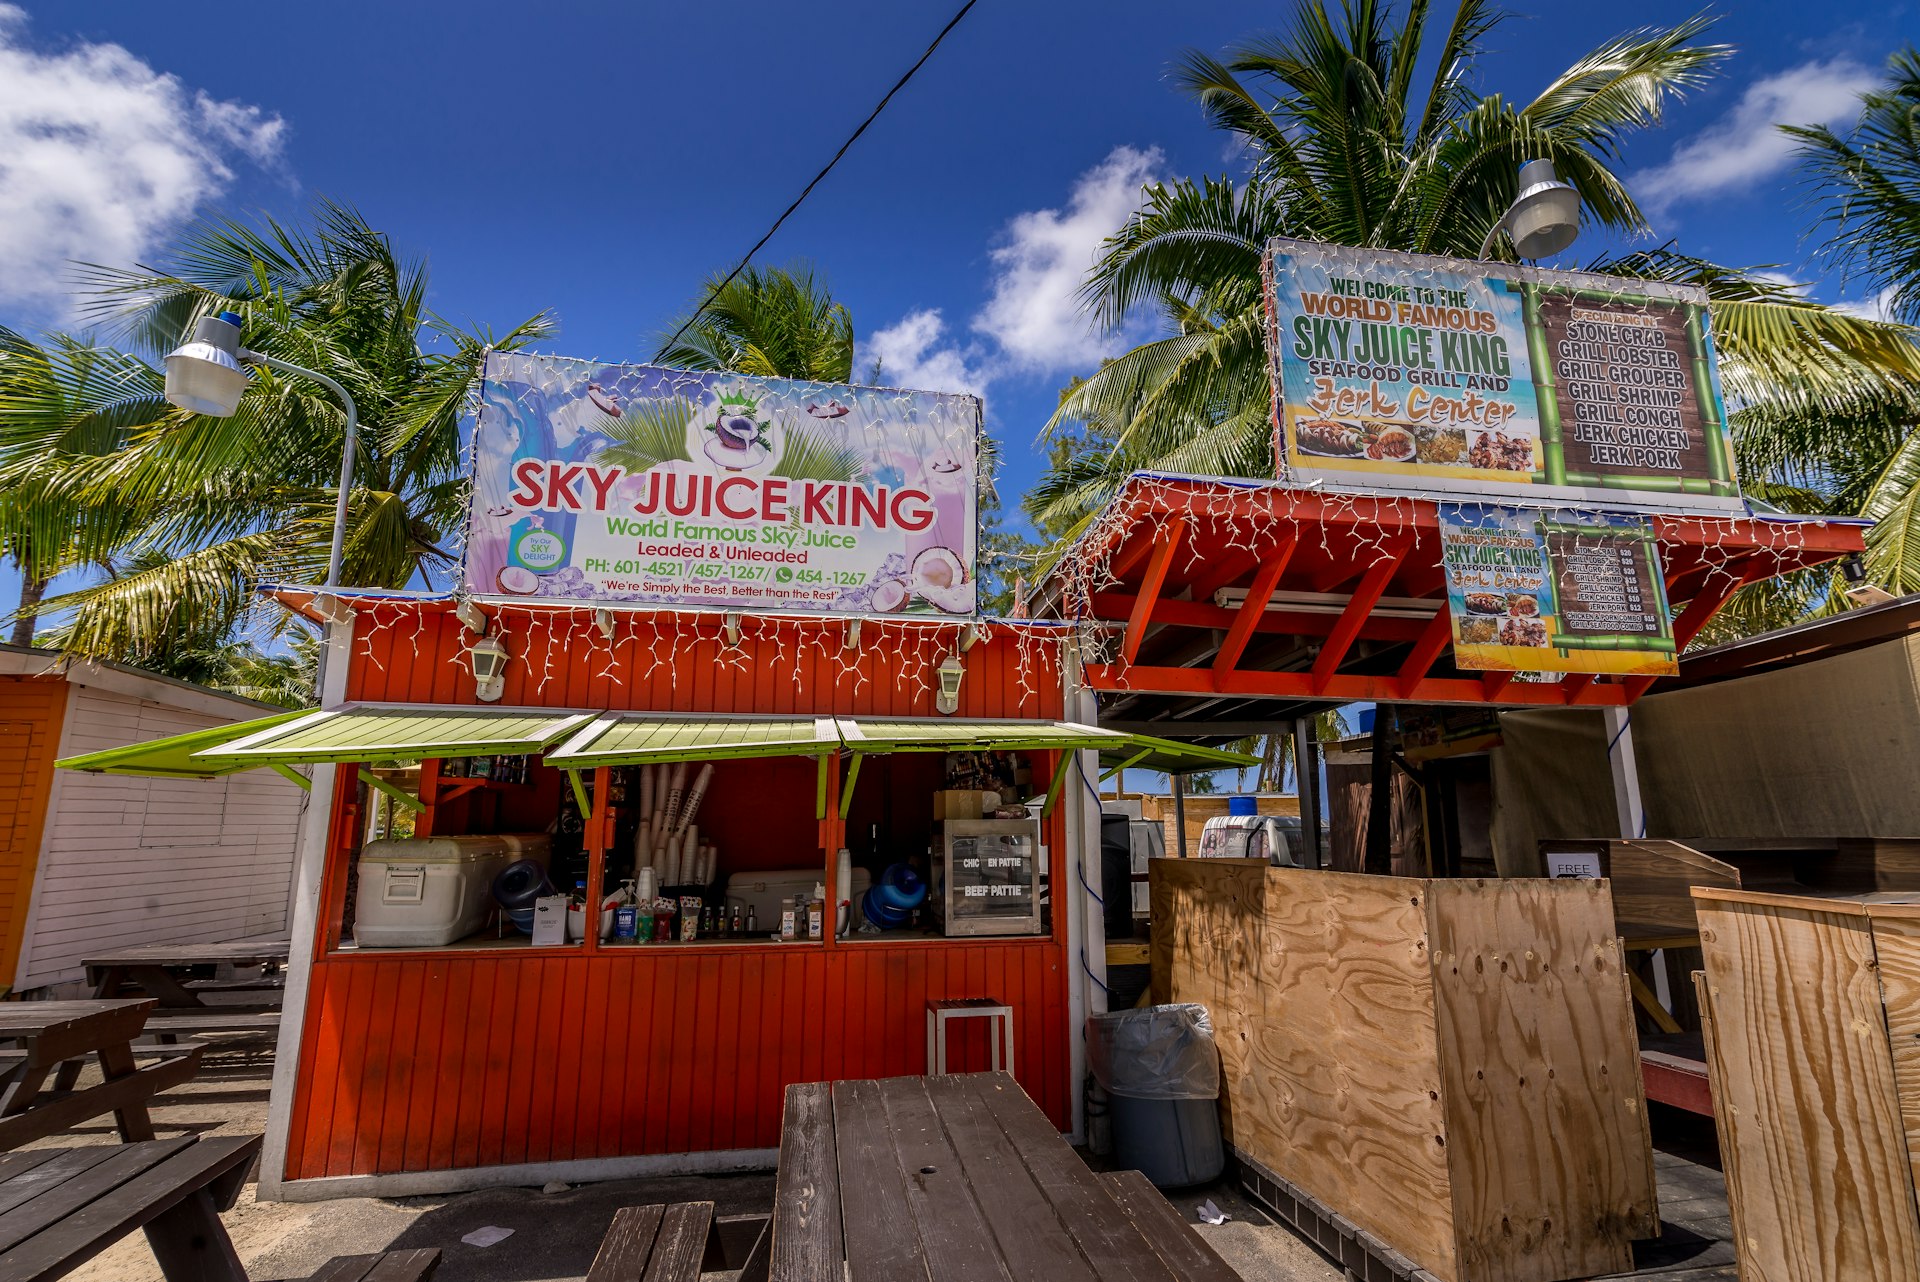 A small hut selling sky juice, a Bahamian cocktail